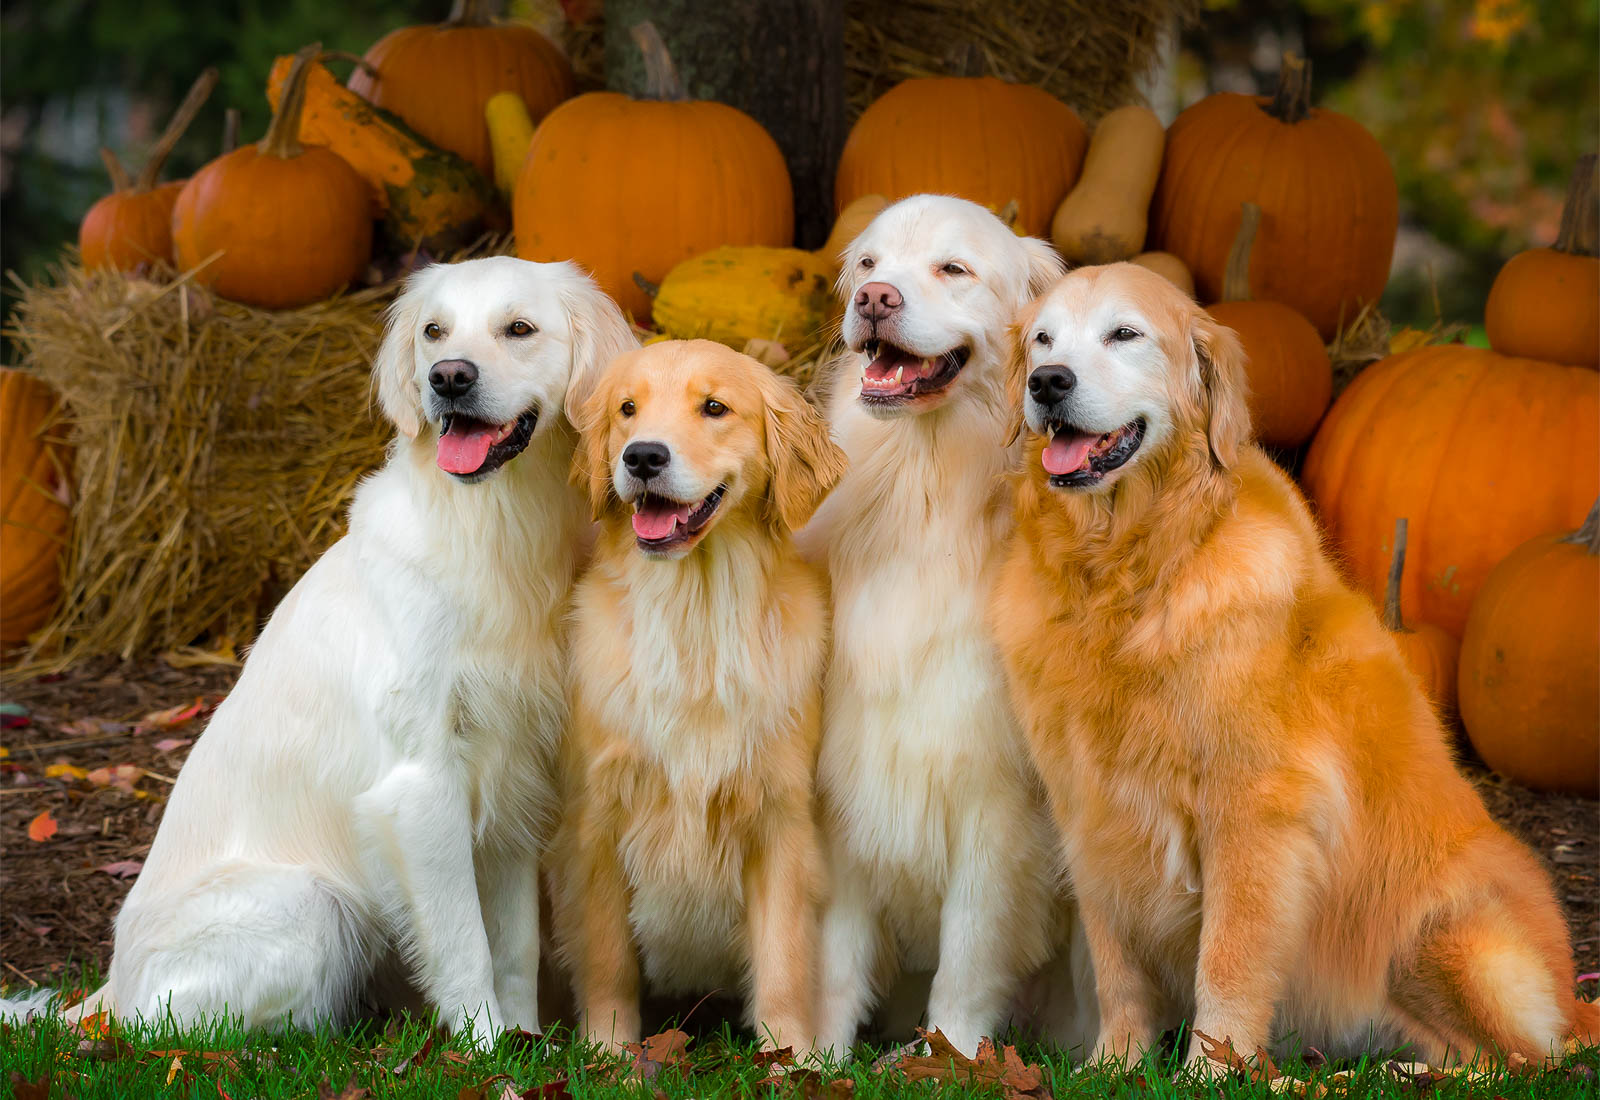 Four golden retrievers smiling in the Autumn evening